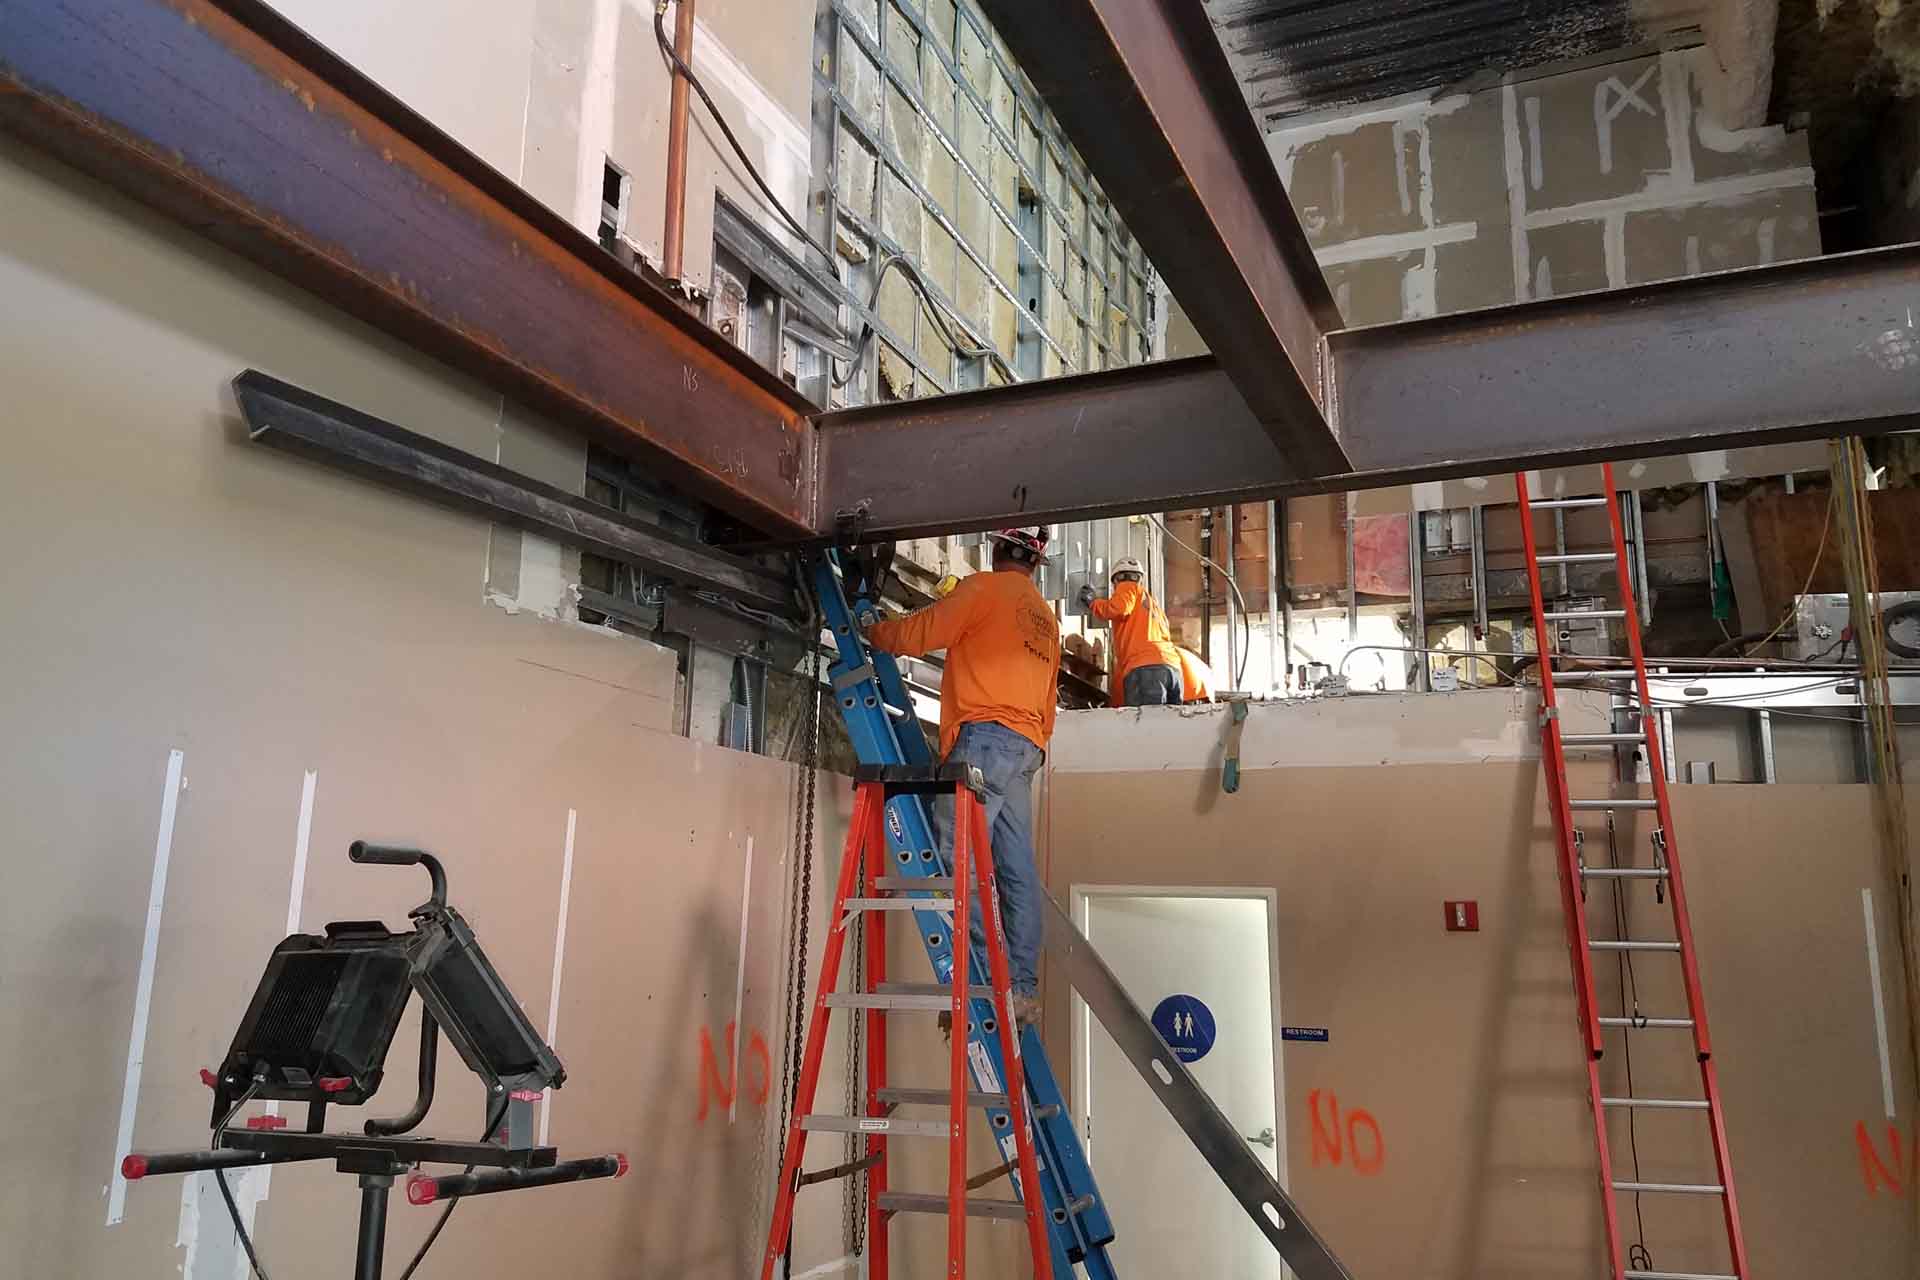 A workers working on iron installation